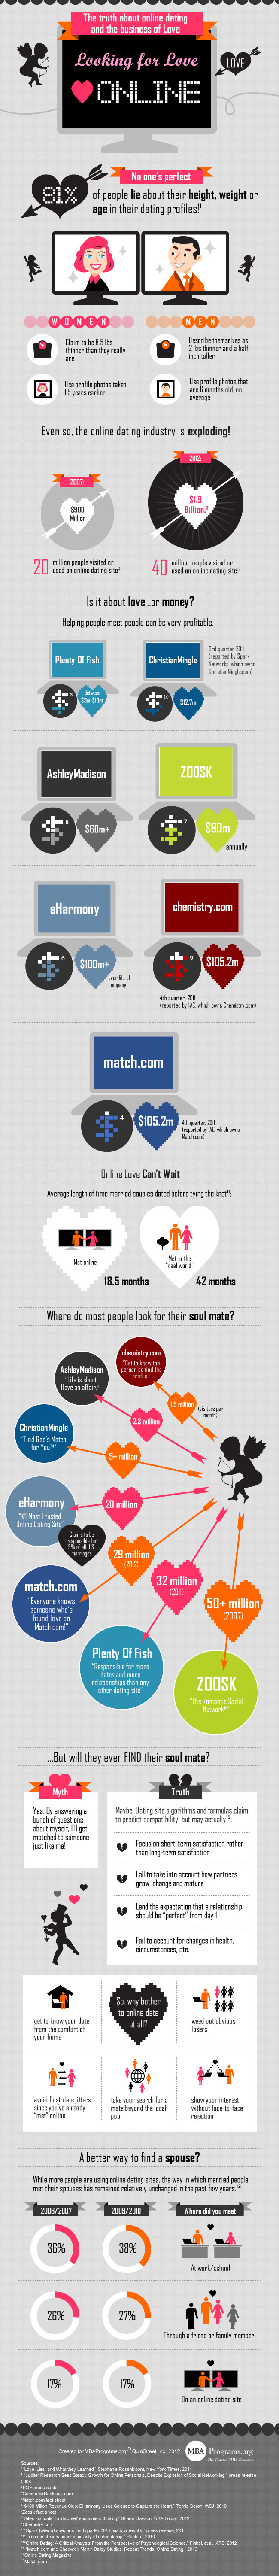 Oh No You Didn’t: The Truth About Online Dating [Infographic]